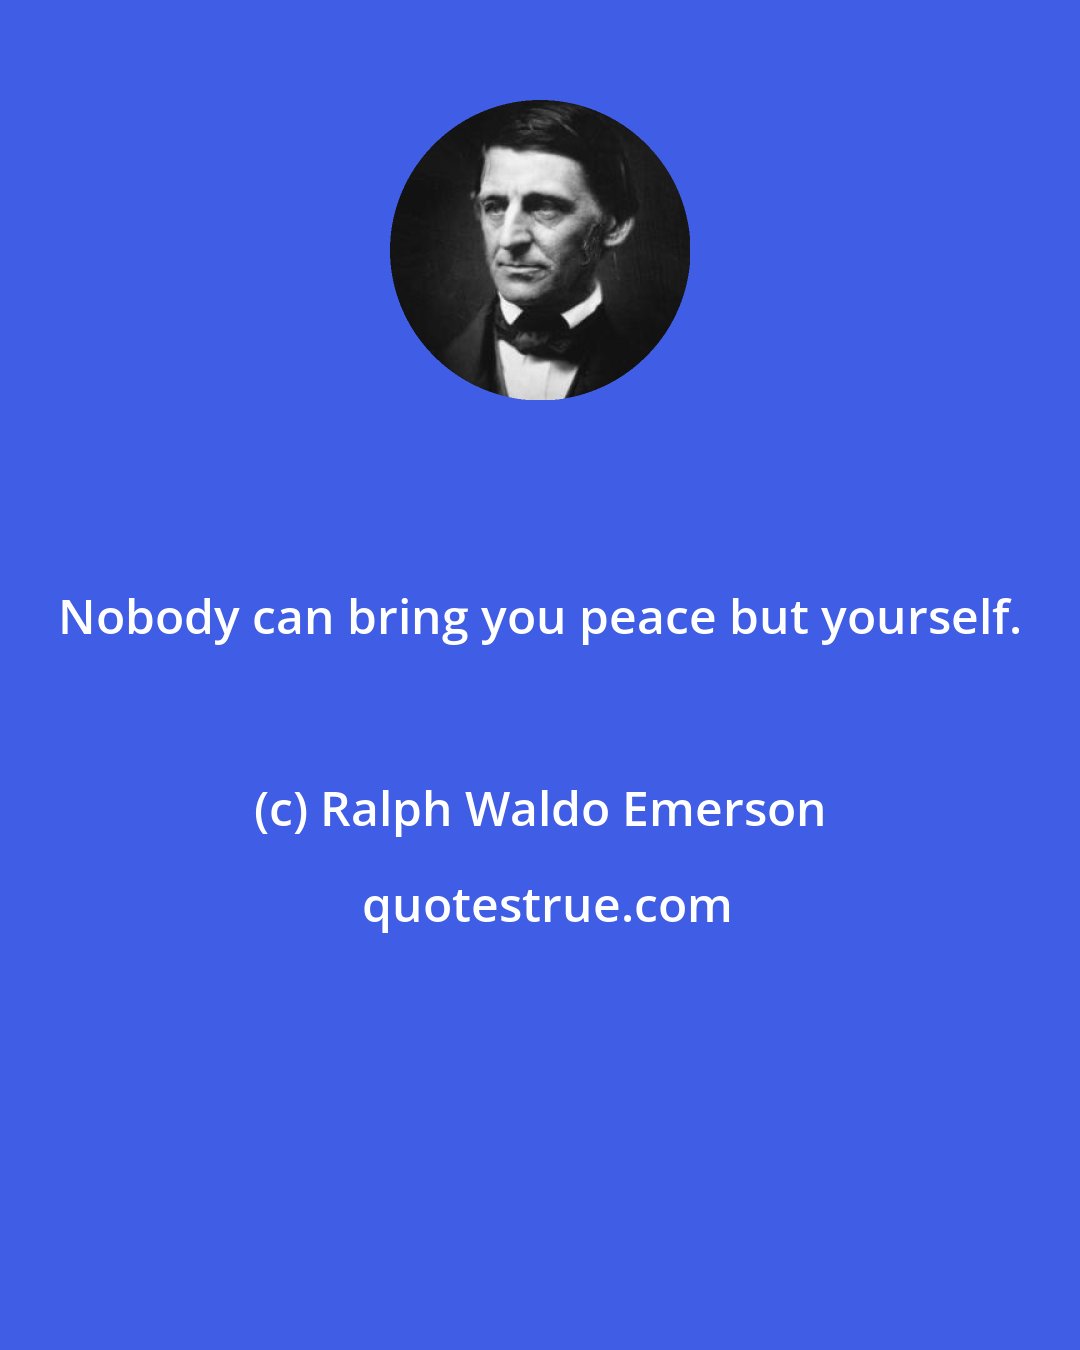 Ralph Waldo Emerson: Nobody can bring you peace but yourself.